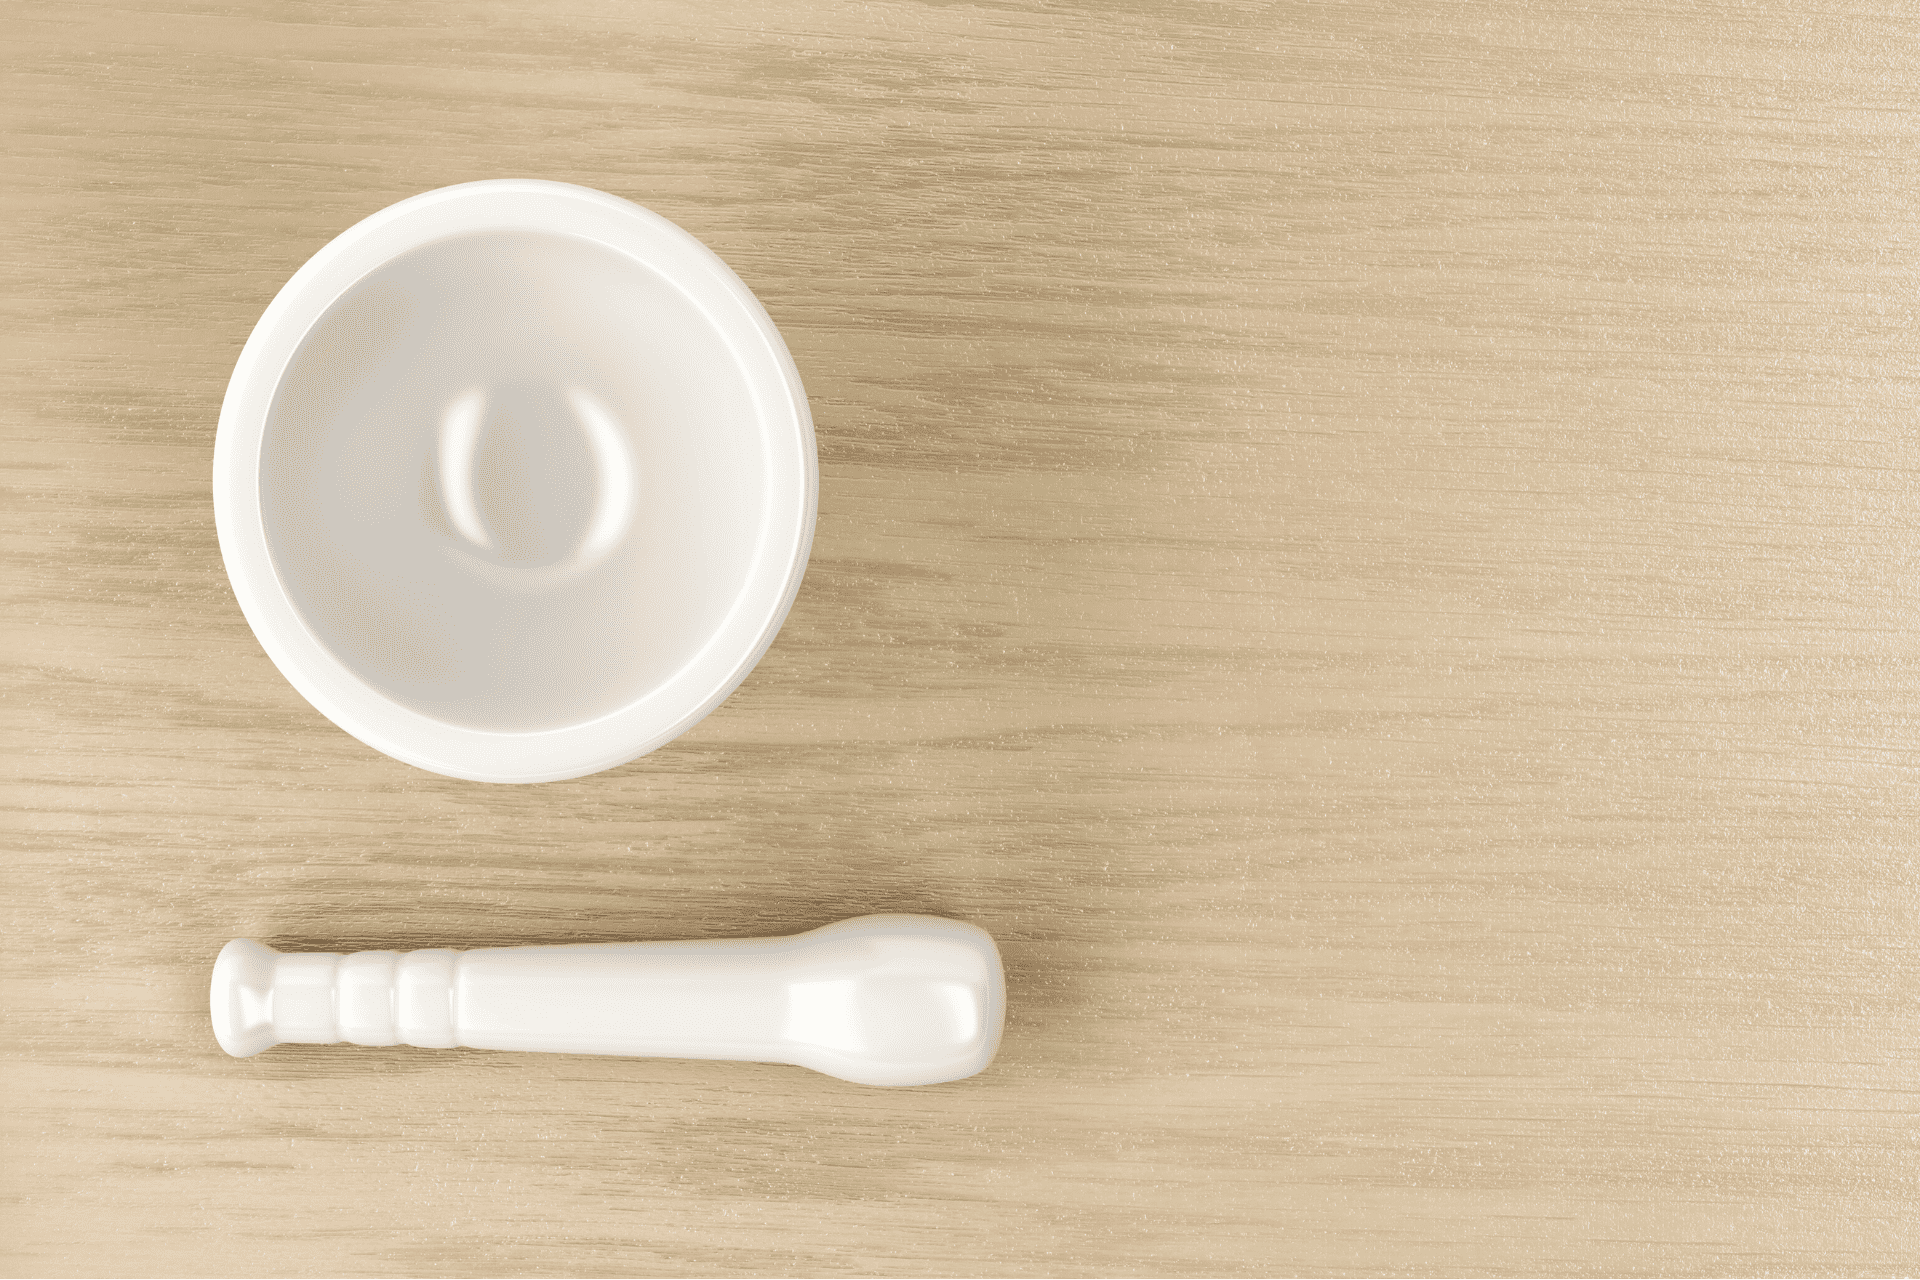 A ceramic mortar and pestle laid out on a wooden table